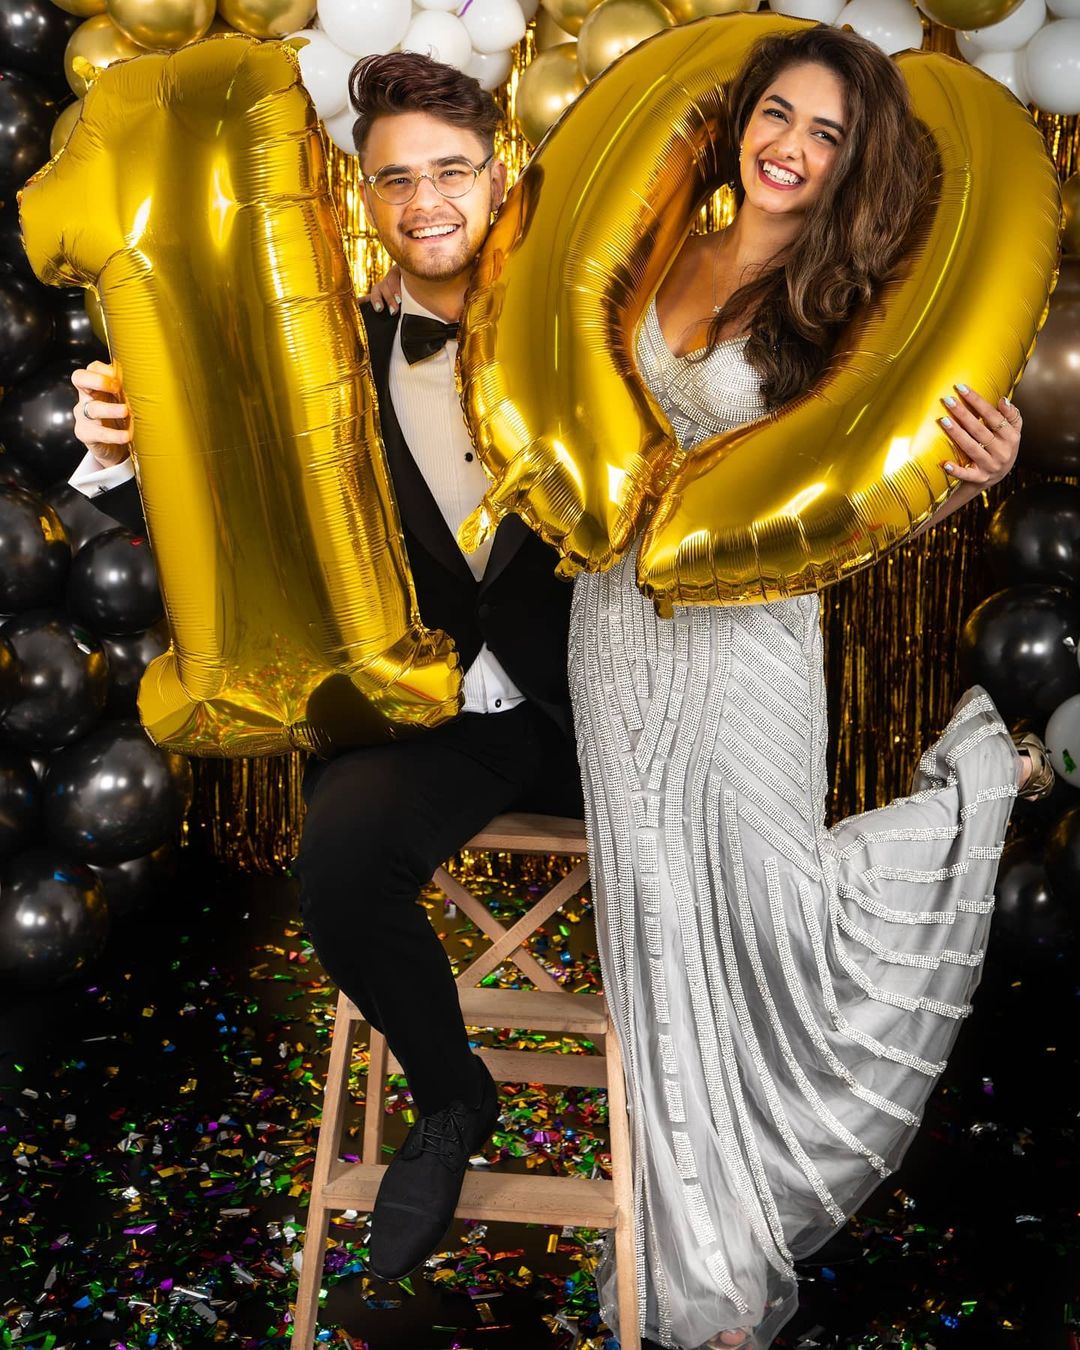 Agon Hare is celebrating with his girlfriend, Sonya Mulkeet on reaching 10 million followers of Project Nightfall across all media platforms. How was Agon's first meeting with his girlfriend, Sonya?